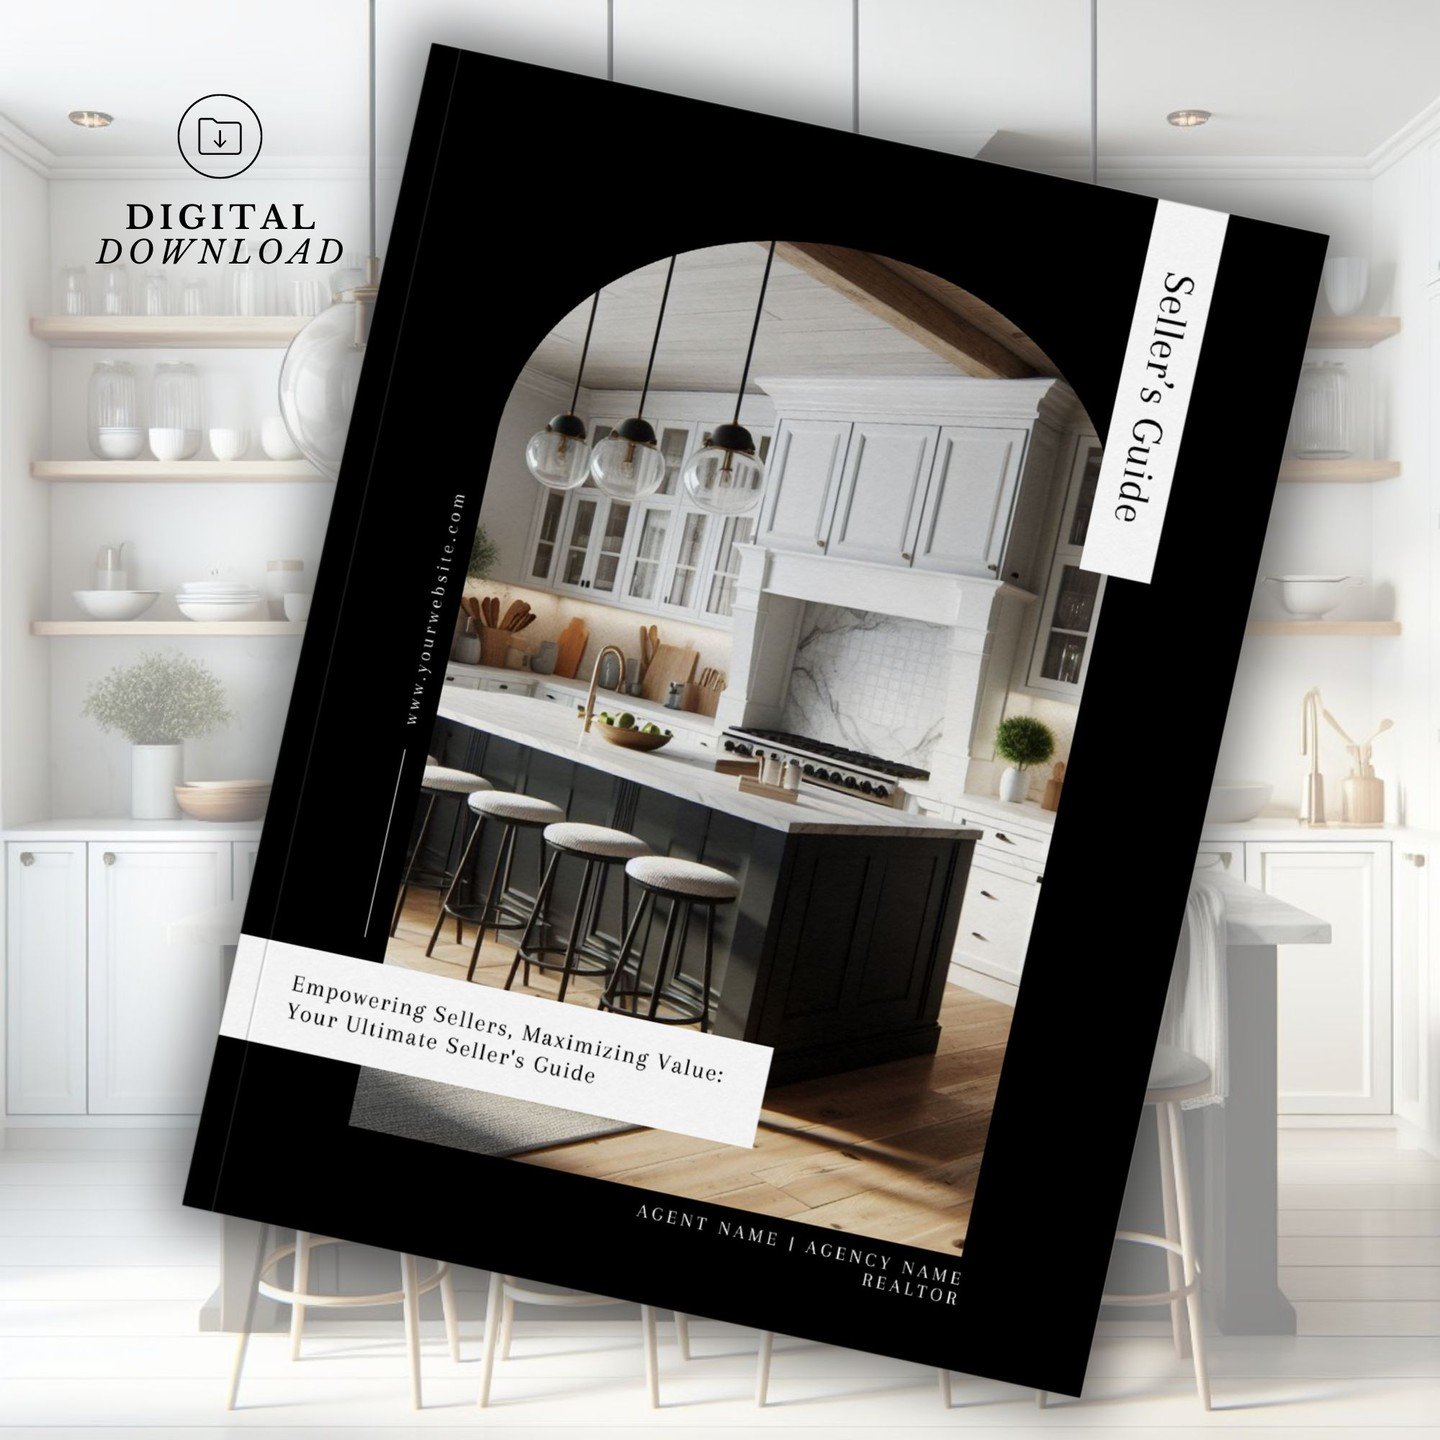 ✨New template✨ Elevate your real estate game with our 17-page Seller's Guide Brochure. From stunning visuals to compelling content, it's all included to help you seal the deal effortlessly. Link in bio to get yours today! #RealEstateMarketing #Listin